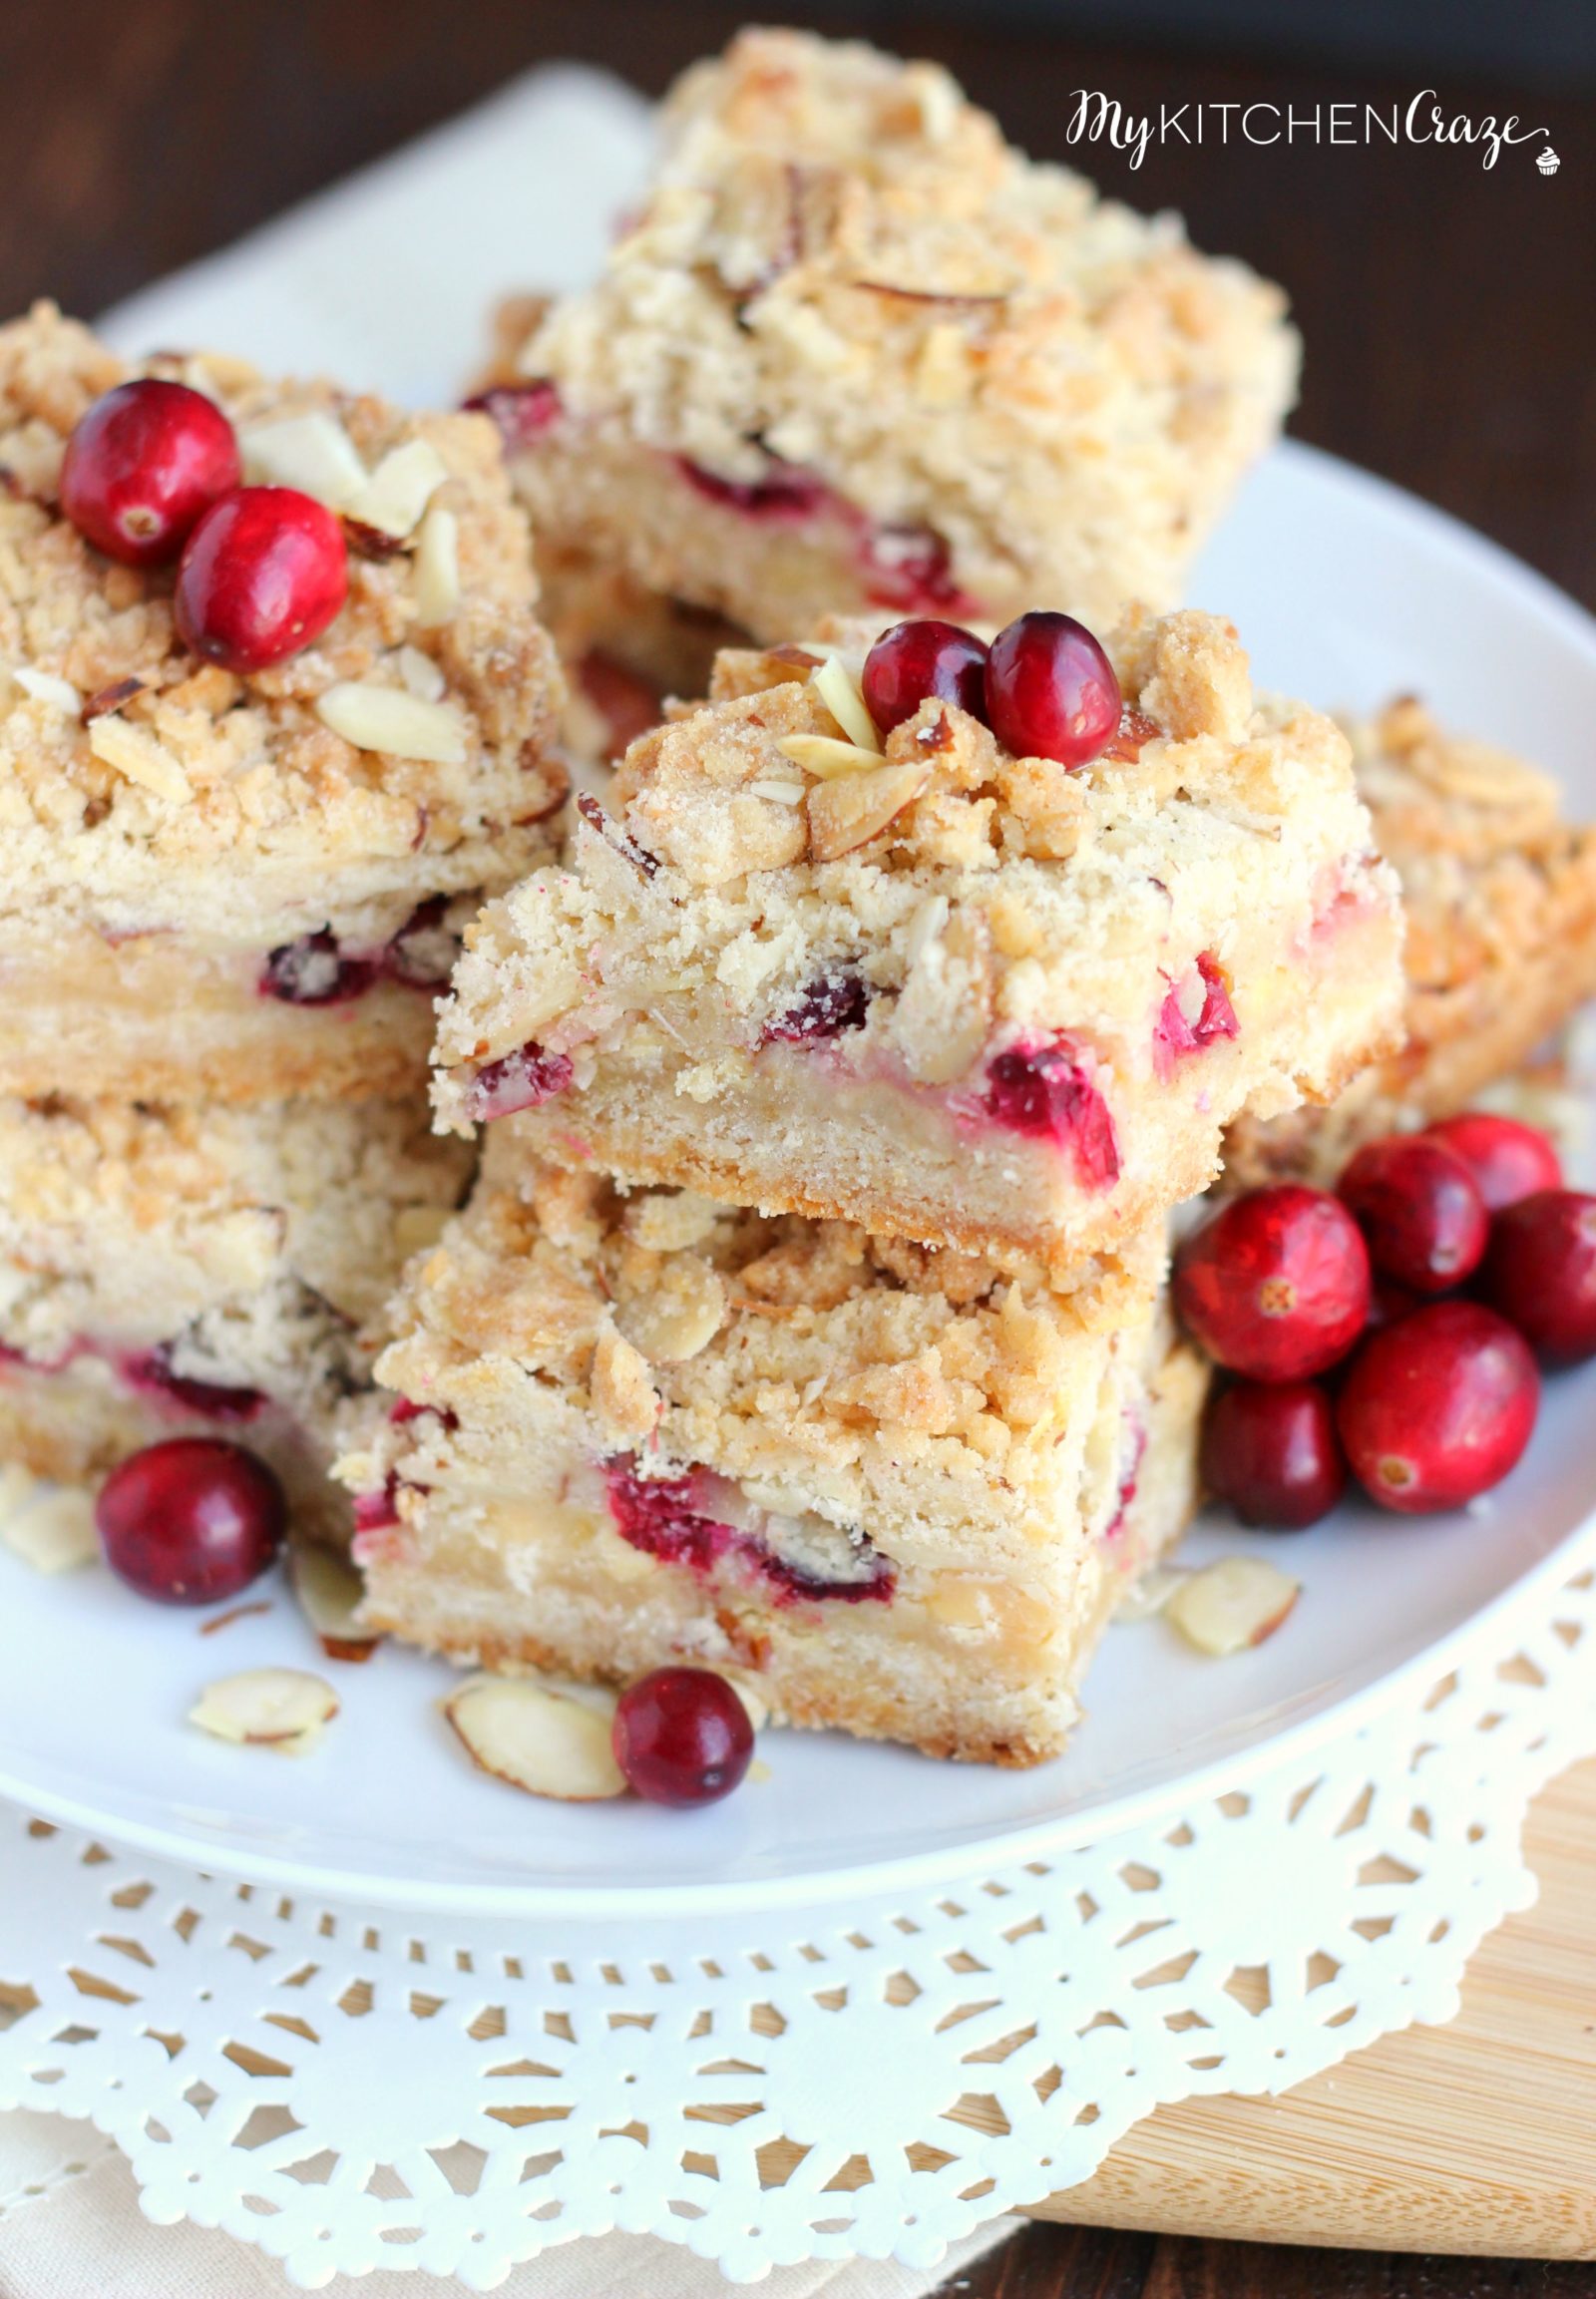 Cranberry Magic Bars ~ mykitchencraze.com ~ A twist on the classic magic bars. These have layers of white chocolate chips, flakey coconut, condensed milk and fresh cranberries. These magic bars will be gone before you know it!